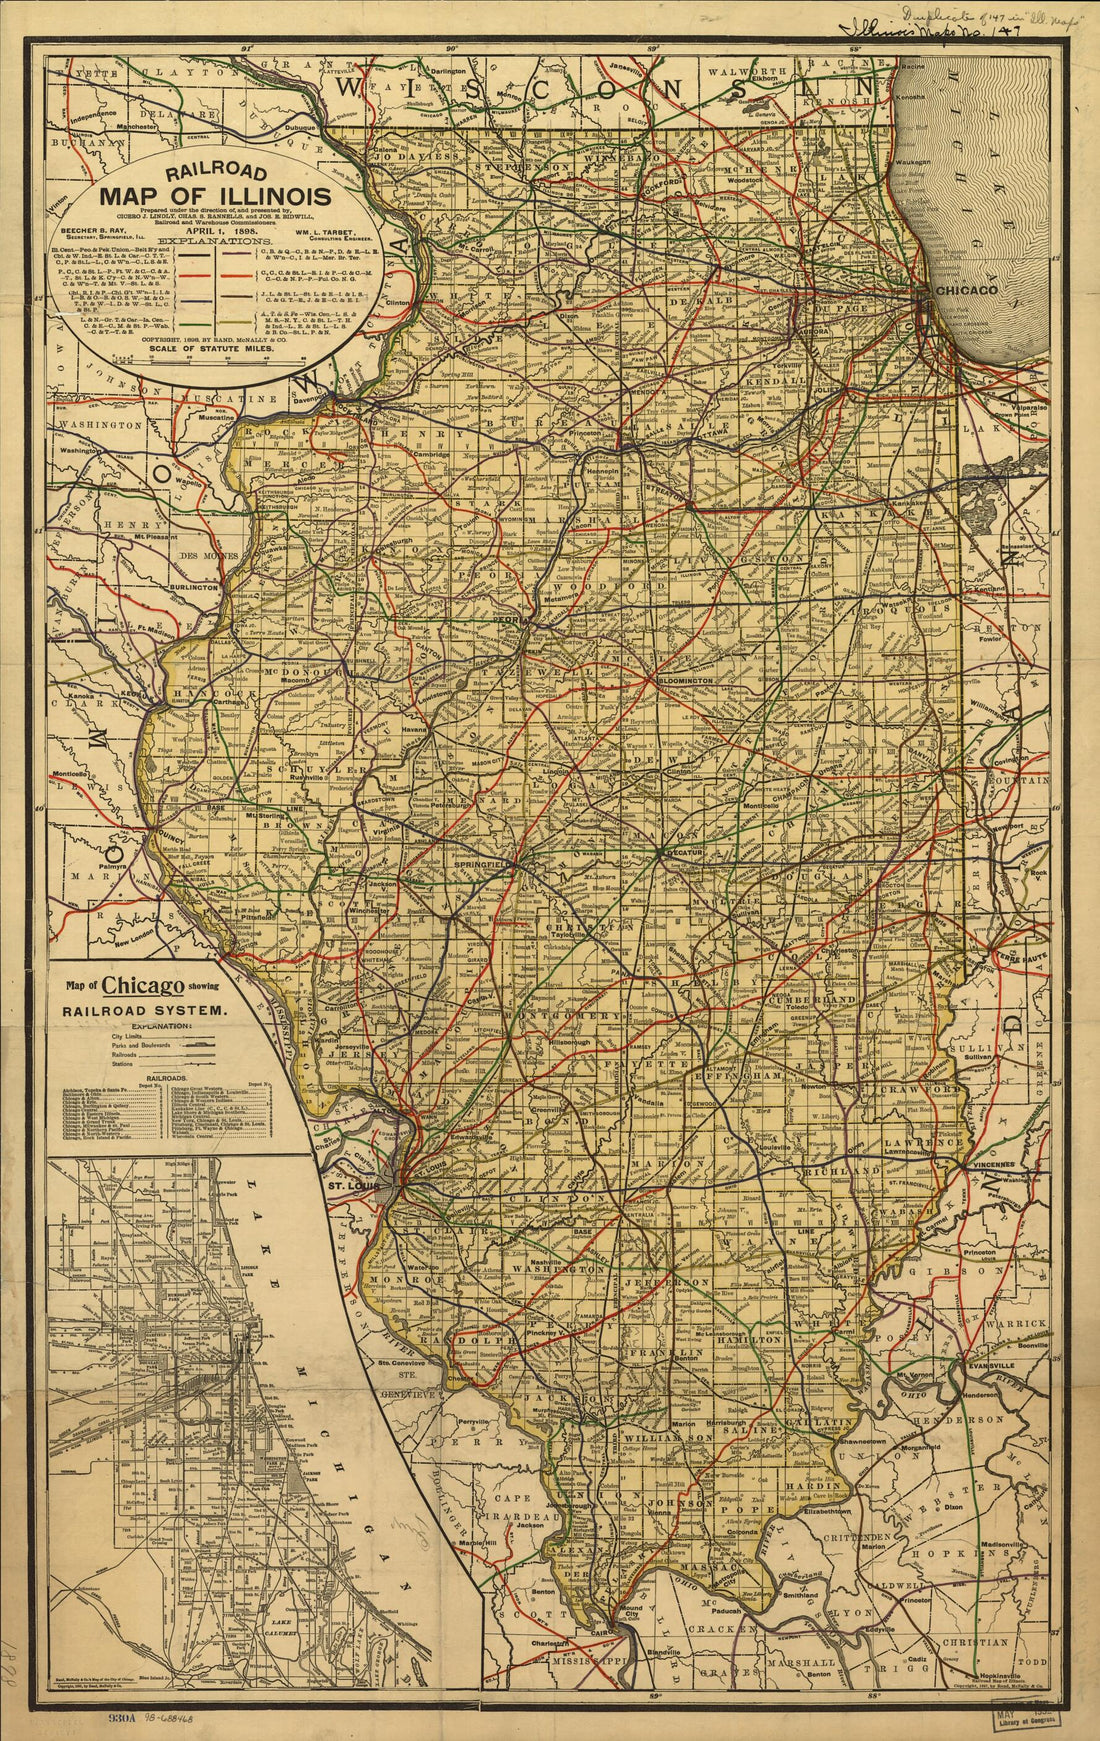 This old map of Railroad Map of Illinois Prepared Under the Direction Of, and Presented By, Cicero J. Lindly, Chas. S. Rannells, and Jos. E. Bidwell, Railroad and Warehouse Commissioners. April 1, from 1898 was created by  Rand McNally and Company in 189